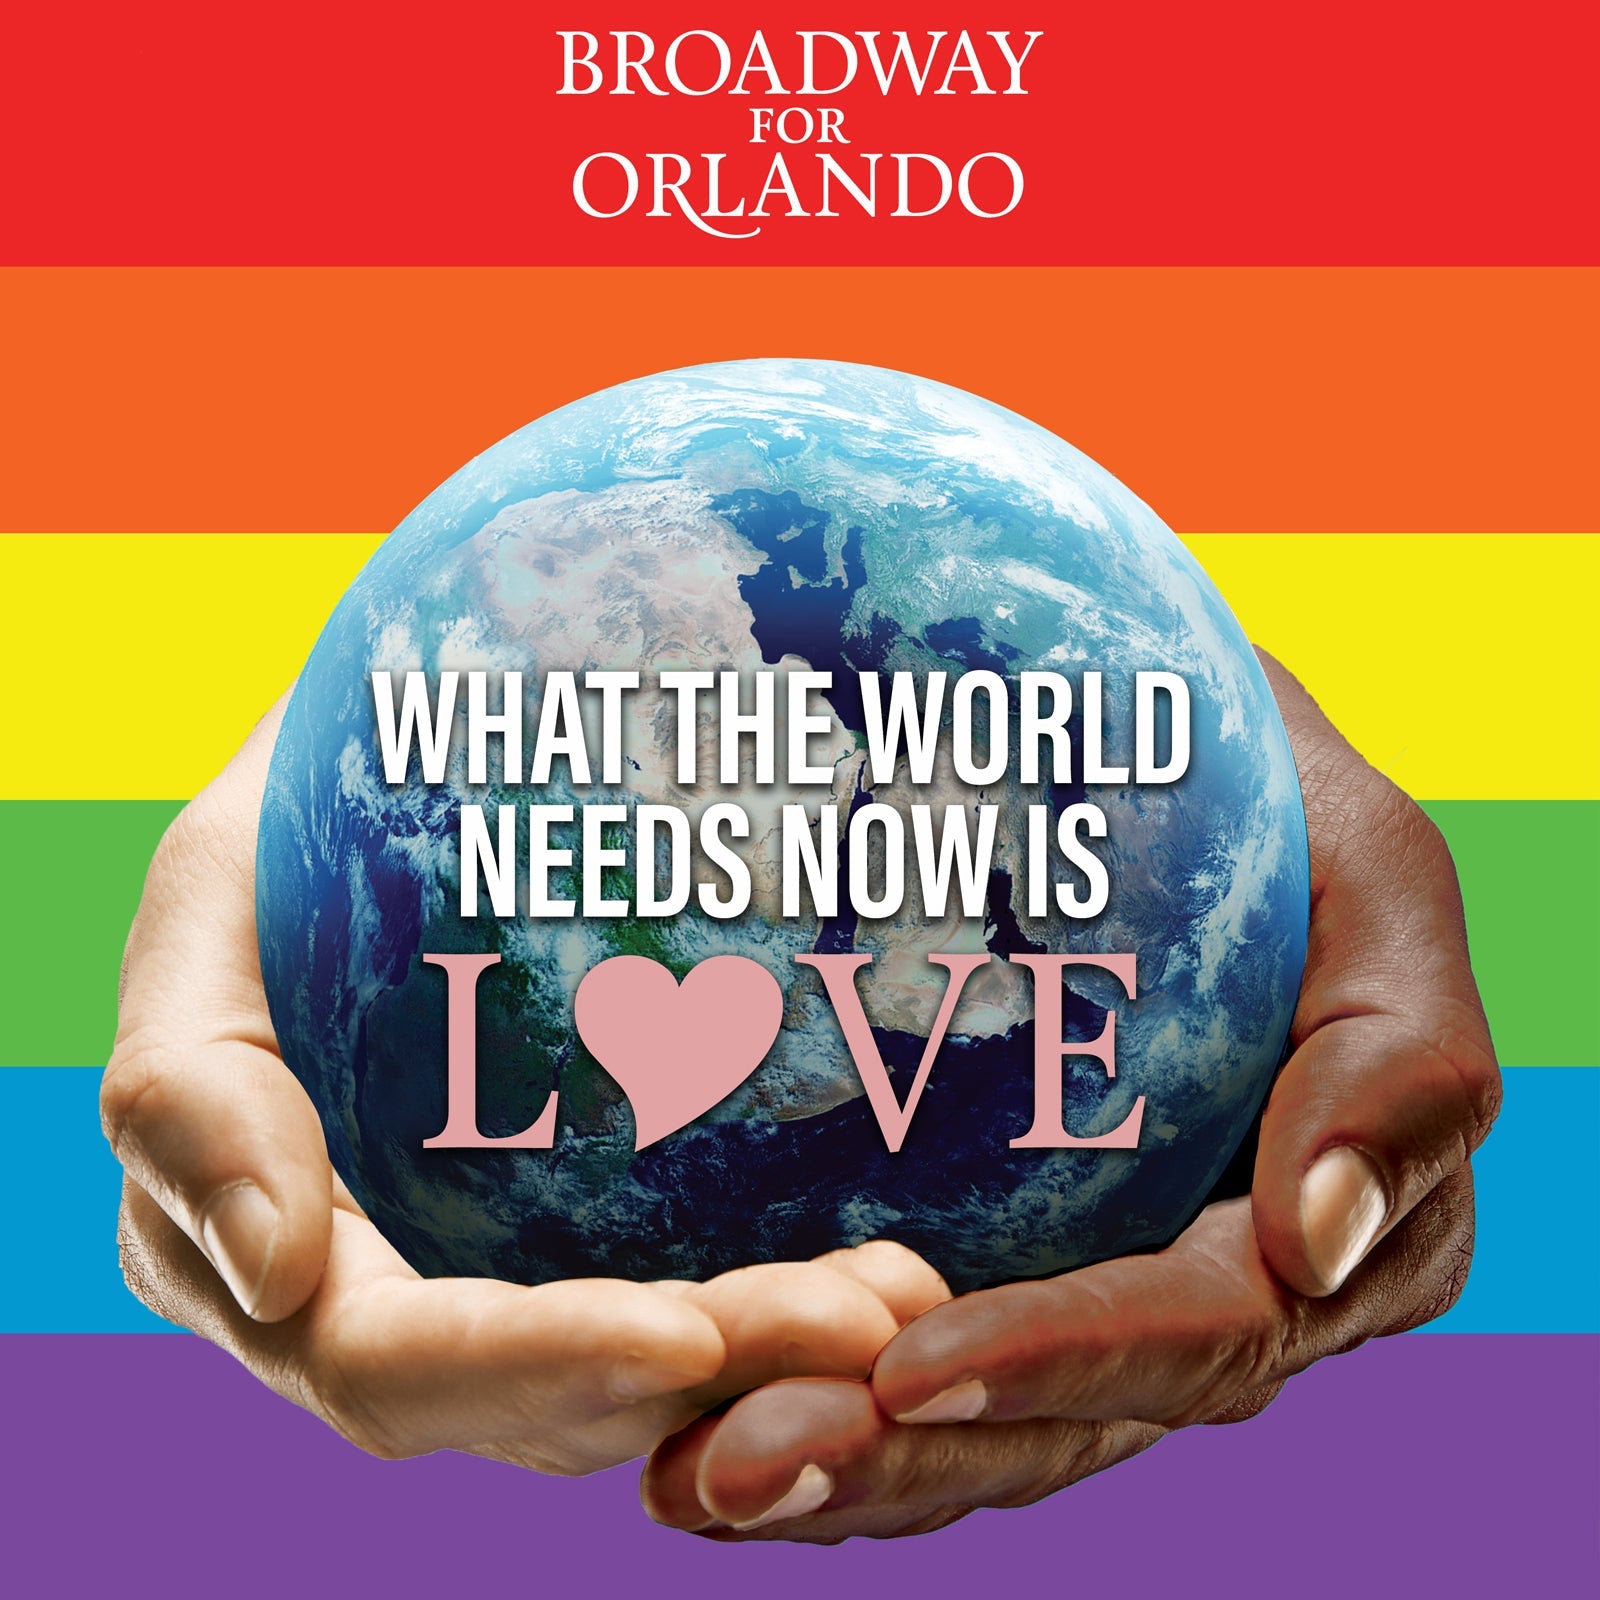 What the World needs Now. The World needs Love. From Broadway with Love. What the world needs now is love